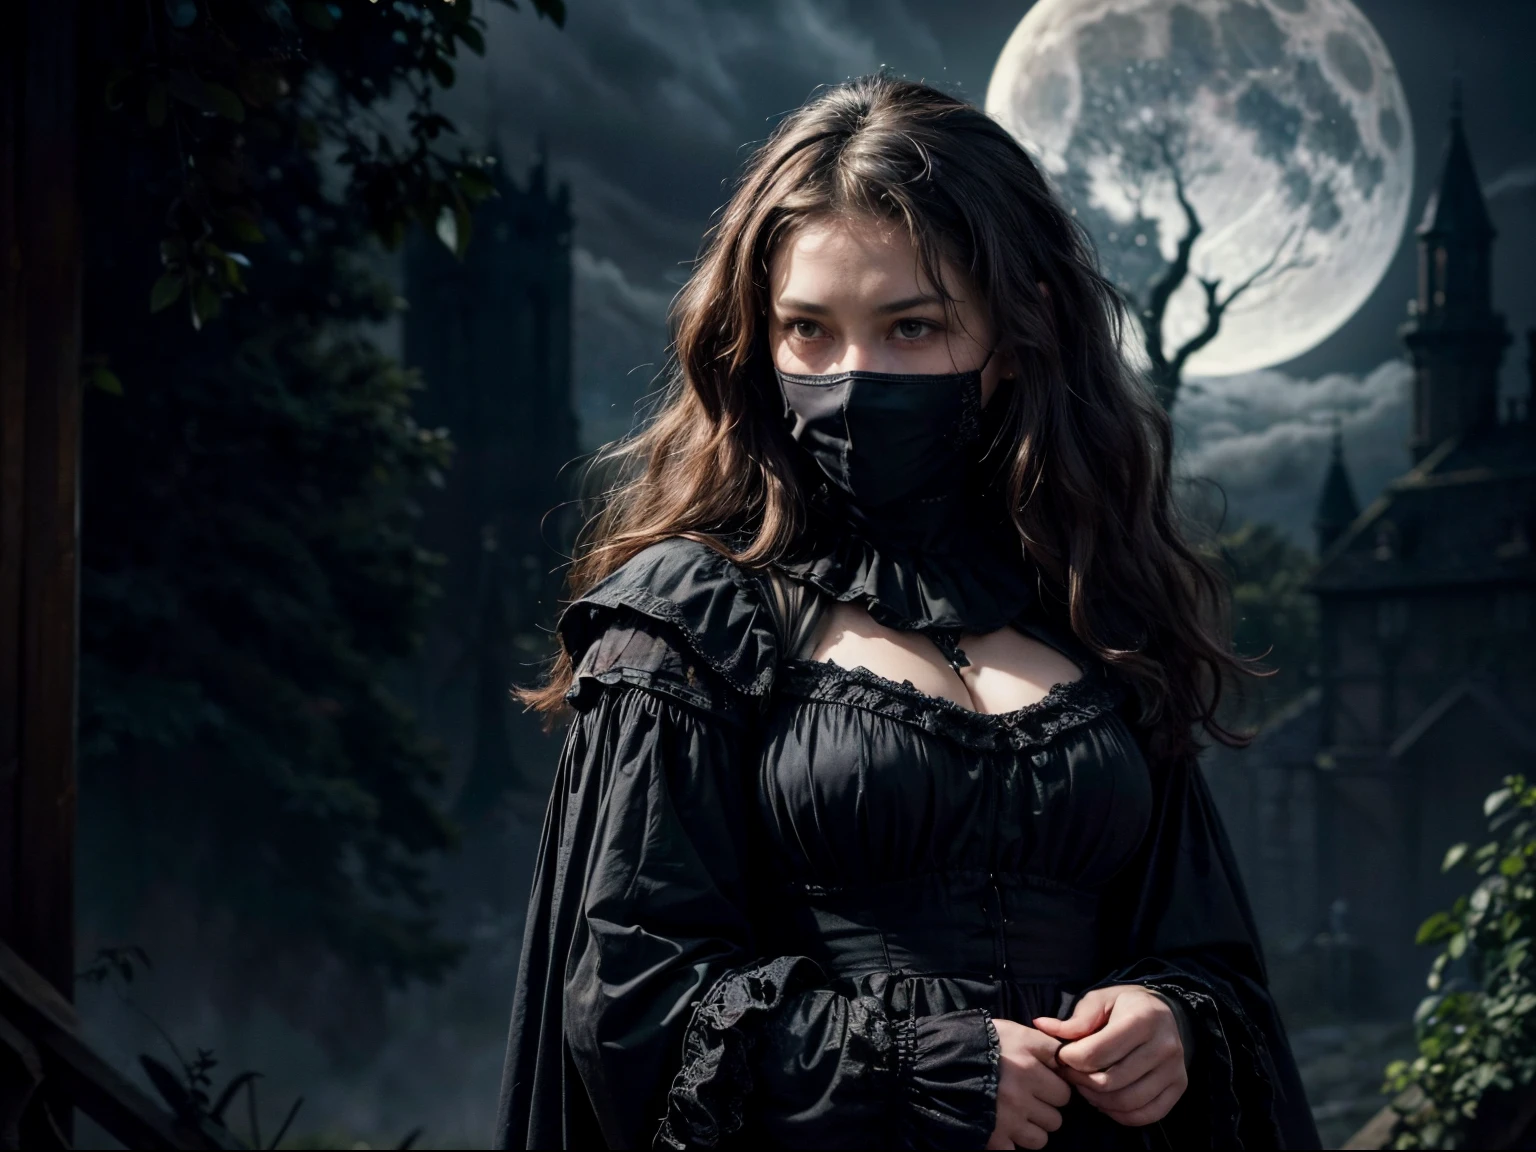 (% of photo is black in drawing:1.4), (detailed fabrics:1.2), (early sunrise light:0.5), (Rembrandt lighting:1.3)the full figure of a dark fully draped female with a pale white oval mask on, glides through a gothic landscape, her black boots support her body, she runs towards a small cottage in the distance, the cottage has a single window lit in the darkeness, mix 4, realistic, photo_\(medium\), solo, (masterpiece), (photorealistic: 1.3), ultra detailed, (high detail) skin: 1.2), (best quality: 1.0), (ultra high resolution: 1.0), (Orchan-6500: 0.3), wavy detailed hair, long dark hair, moon light blue, (beautiful detailed drapery and mask), (grey and moody: 1.0), mysterious haunting scene, movement captured of flowing drapery, (an extremely delicate and beautiful)), solo female、masterpiece、ultra detailed, accent lighting, high resolution、Farbe々Color、(grey clouds, dead trees, gothic castle ruins, spooky and eerie)), (strong presence )、a beautiful darkness (Highly detailed skin:1.2)、looking at the camera、(blushing_ embarrassed, drooling, aroused)、beauty, Digital SLR, Soft lighting, High quality, FujifilmXT3、Film Lighting、Dramatic、Taken behind branches, dark foreground that focuses camera to dark draped figure of woman, William-Adolphe Bouguereau painterly landscape, trance, attractive、A lovely smilel、having good time, date、quickie, entranced, flirting fun with me., cozy playful, (intimate relaxed style photoshoot)